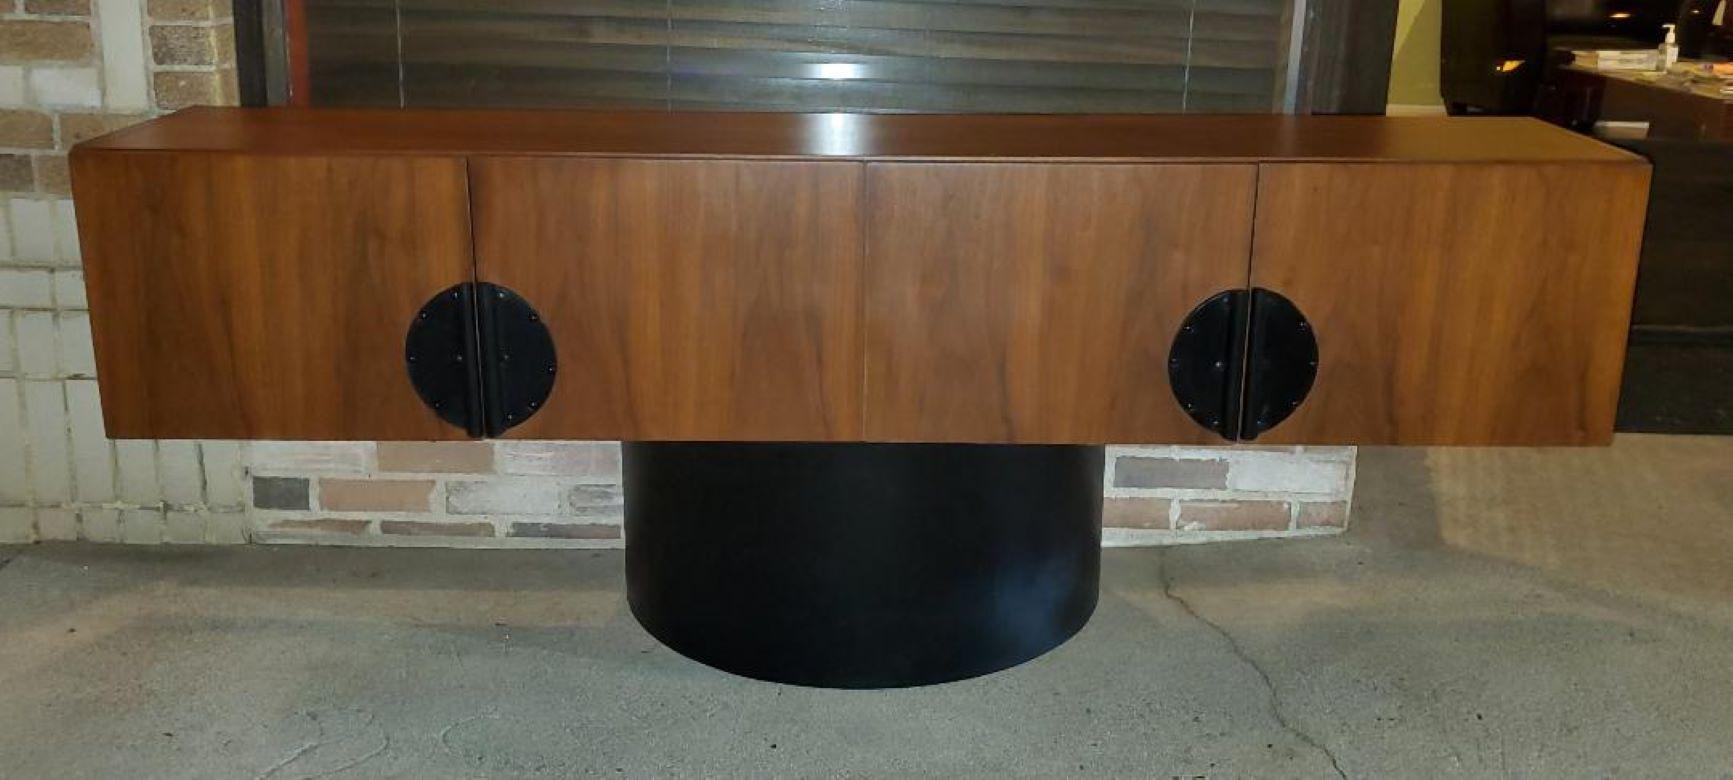 Walnut Credenza By Steelcase Has A Beautiful Walnut Cabinet With Black Circular Leather Pulls And A Black Half Moon Base.
This Steelcase Walnut Cabinet Is Amazing Because It Will Also Store Your Prized Collection Of Vintage Albums / Records. 
The